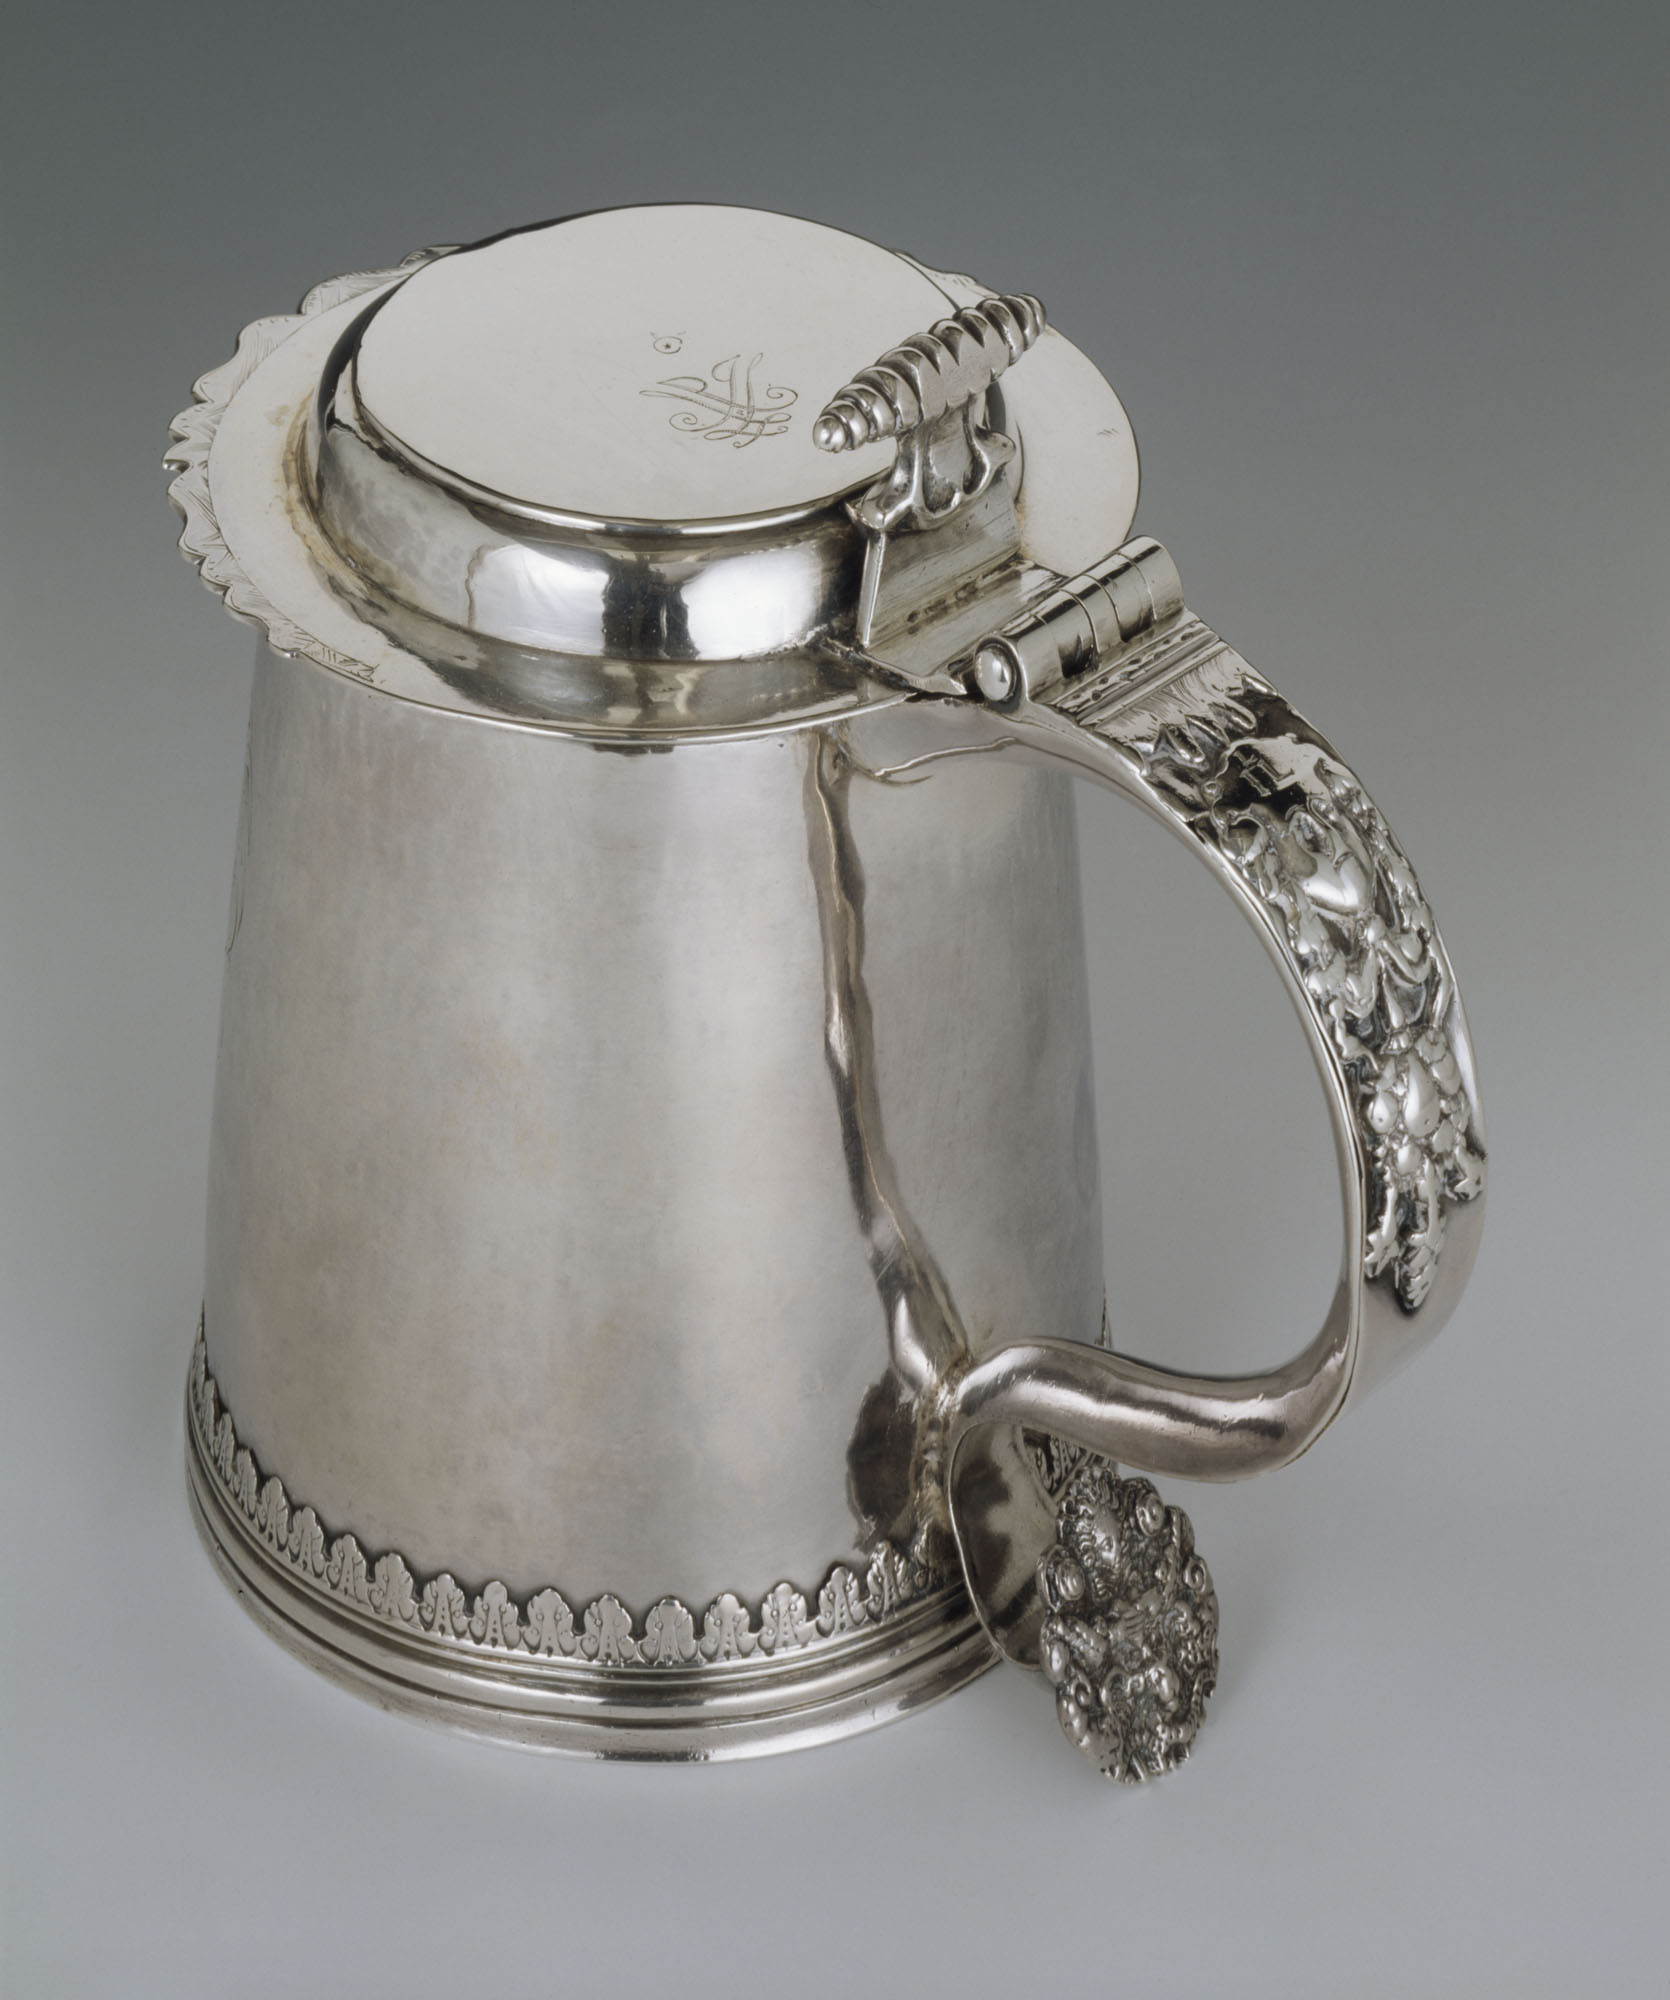 Tankard - Albany Institute of History and Art